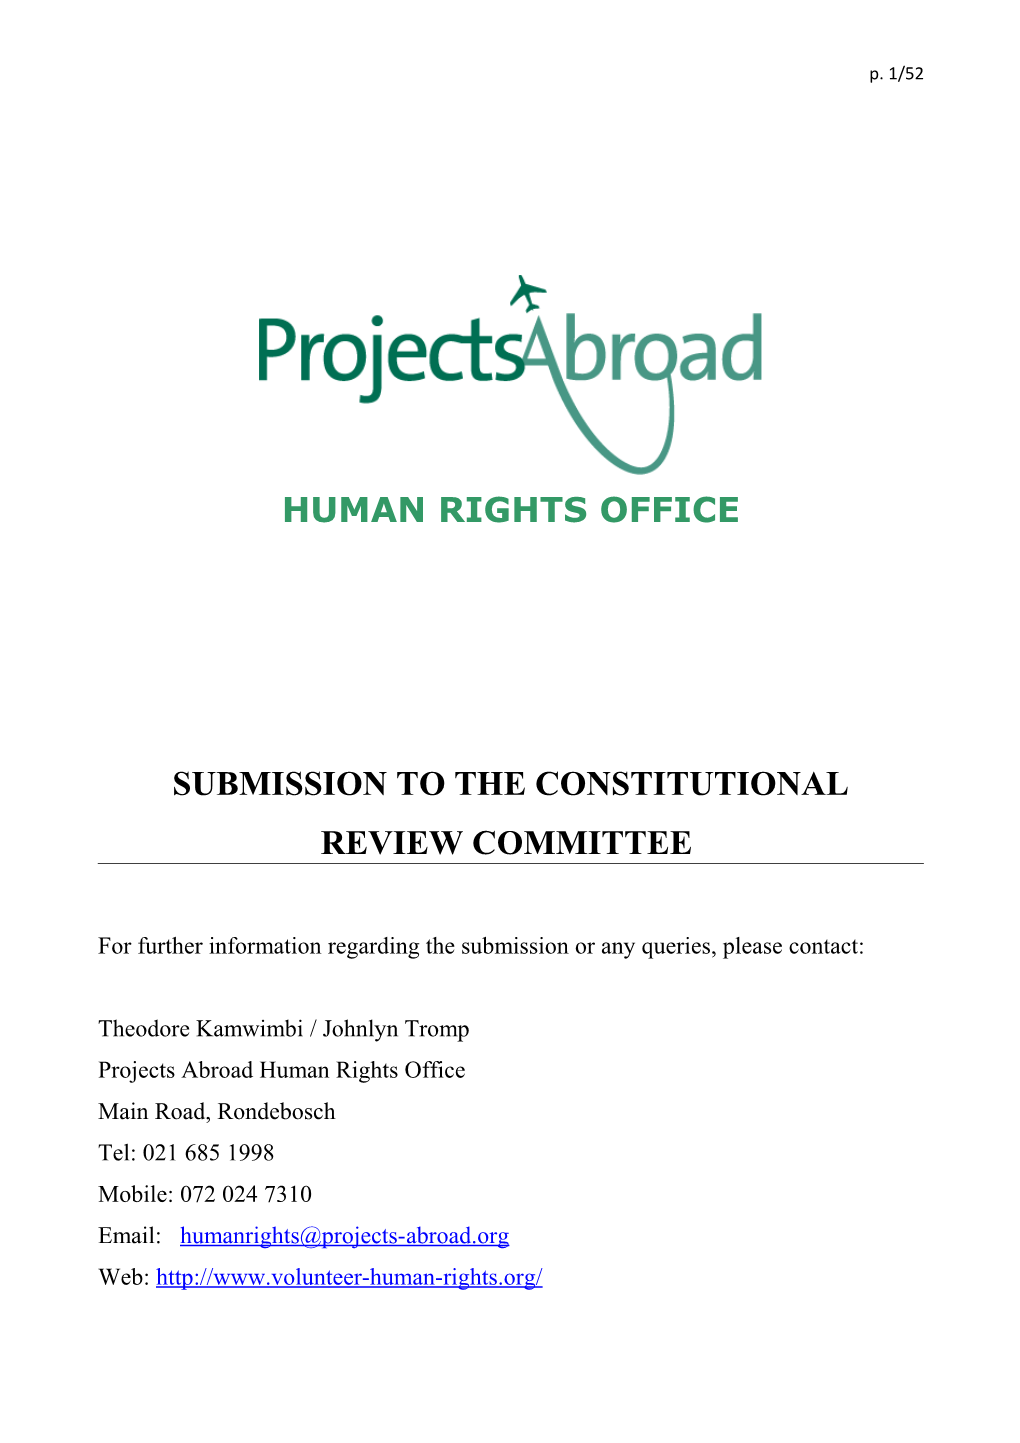 Submission to the Constitutional Review Committee